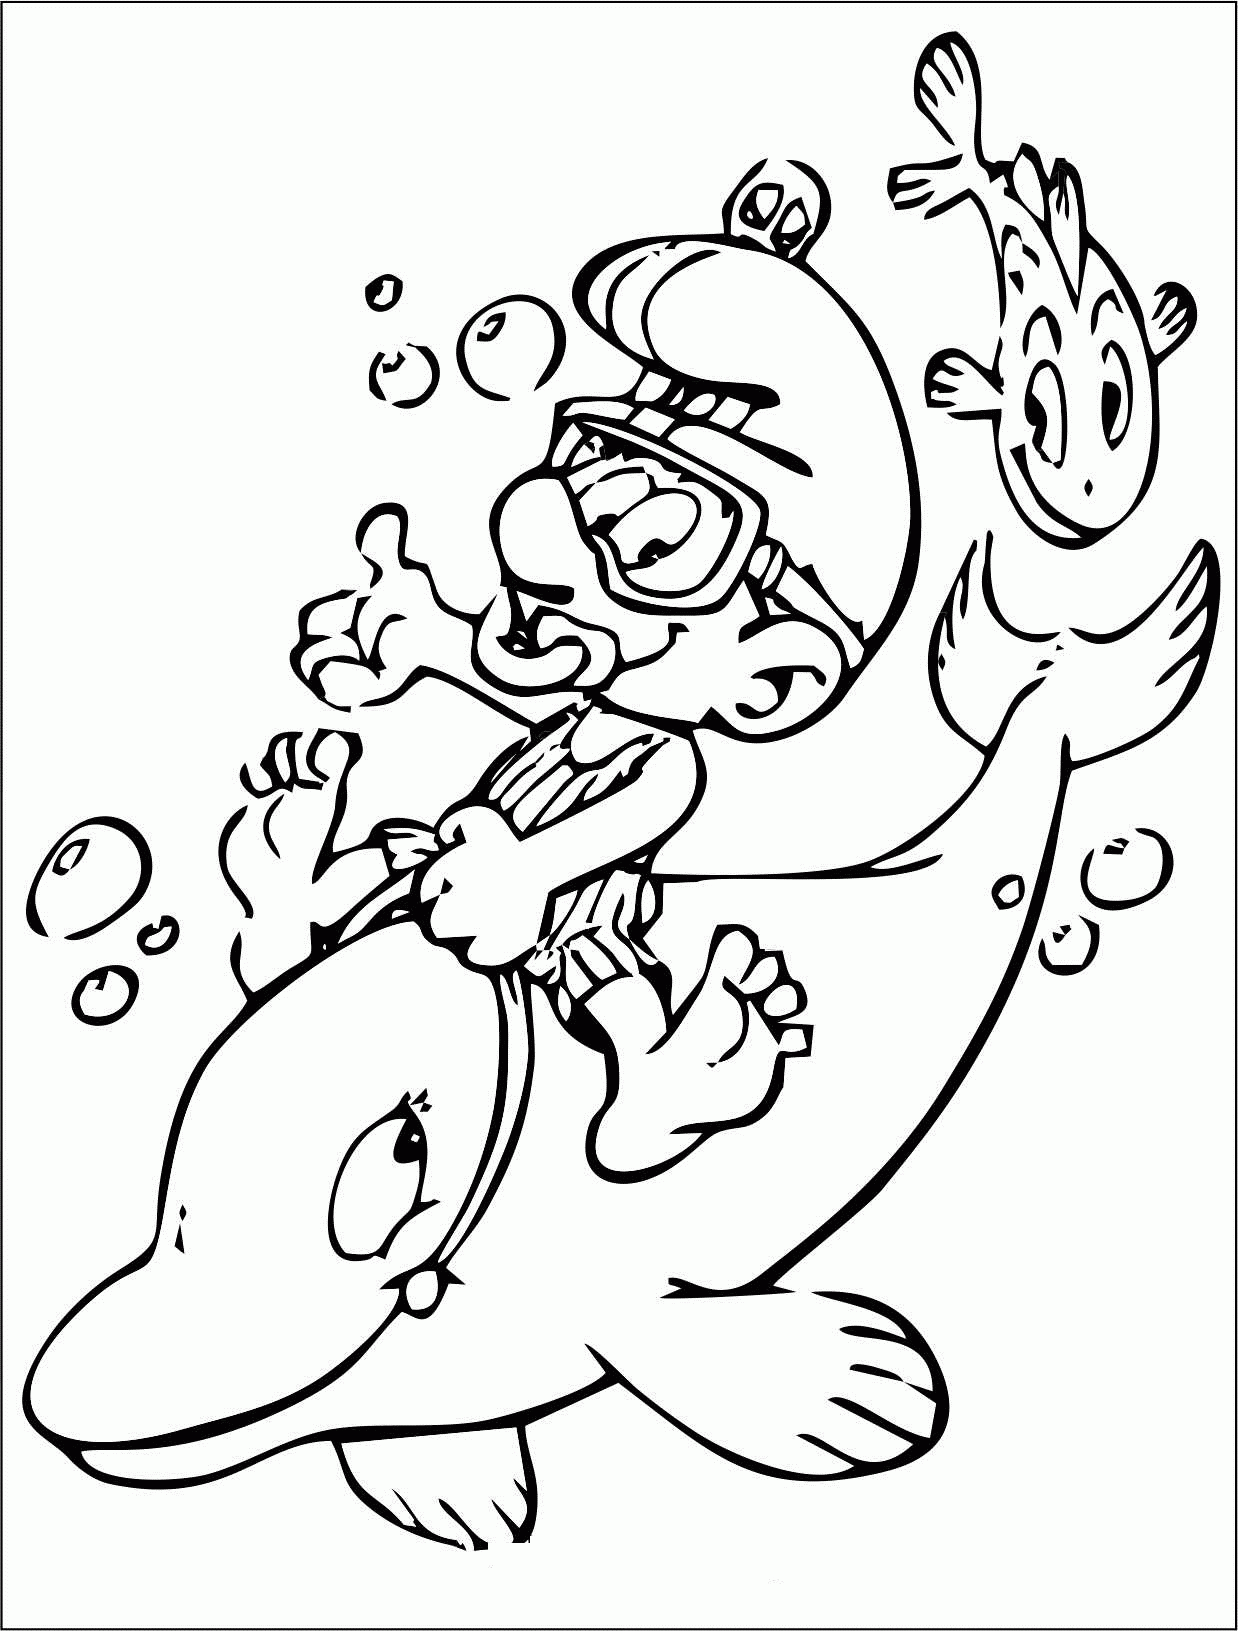 Smurfette Coloring Page - Coloring Home